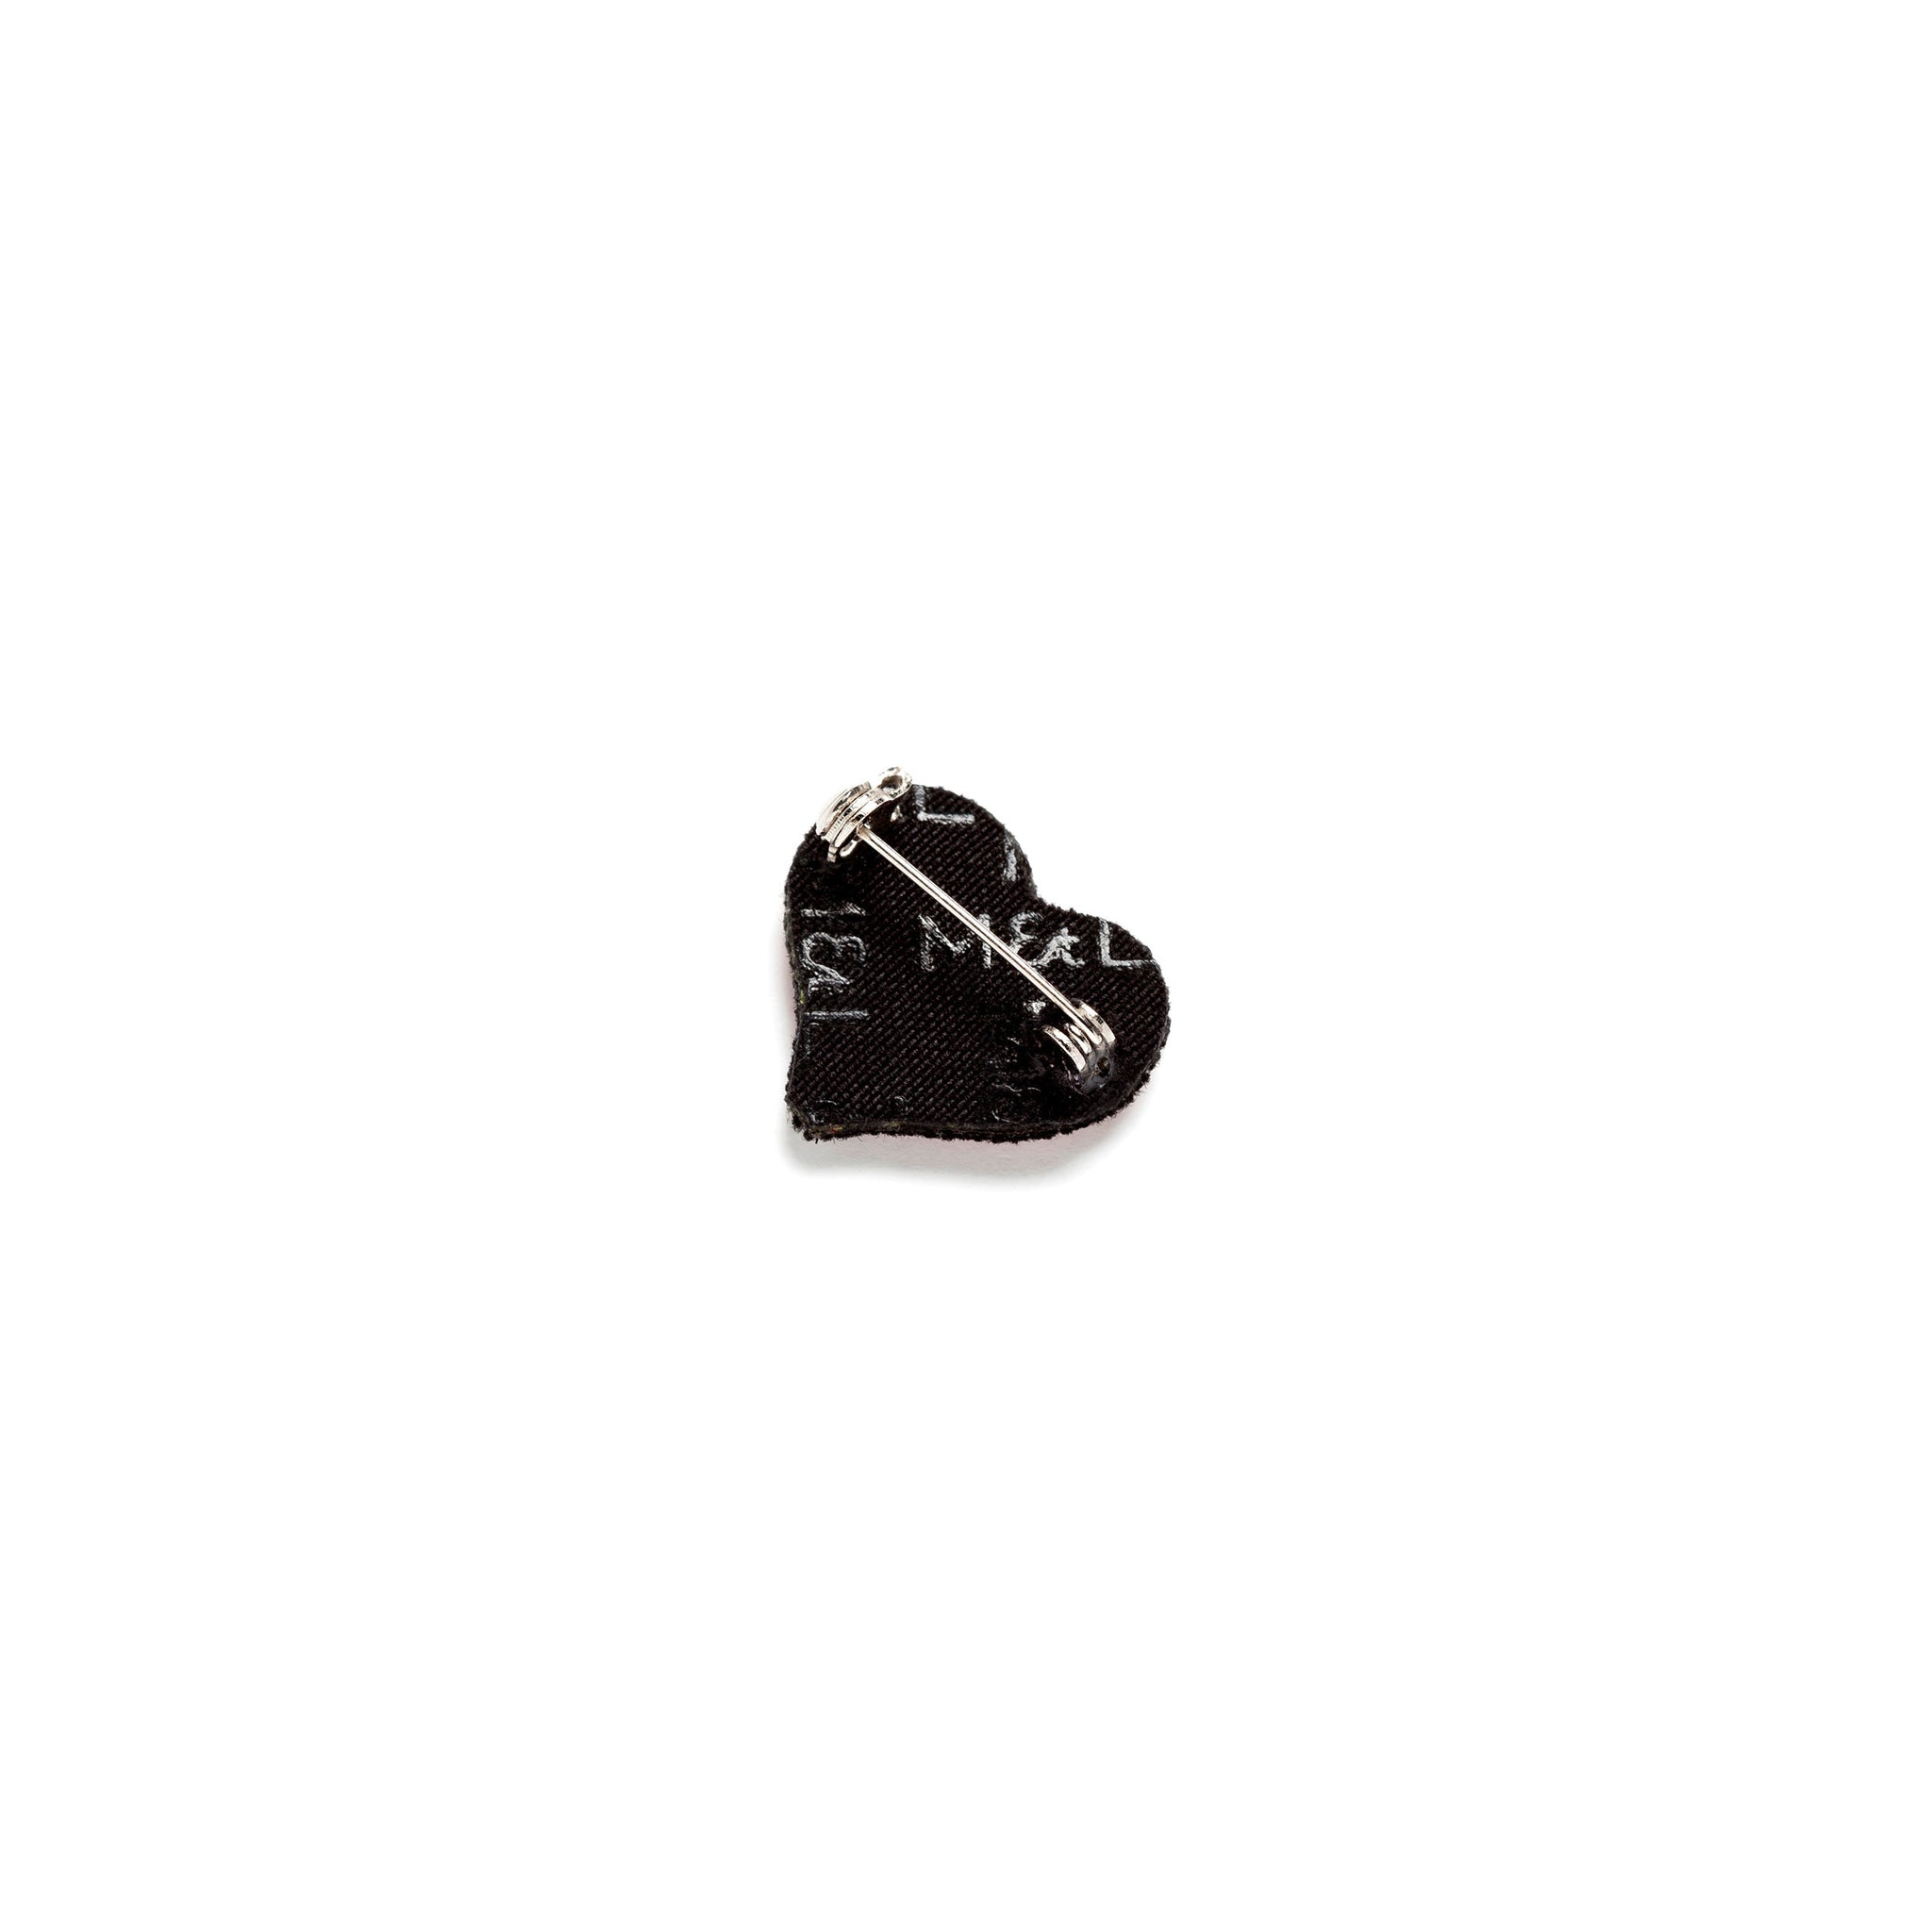 Macon & Les Quoy RED HEART - small Brooch pin